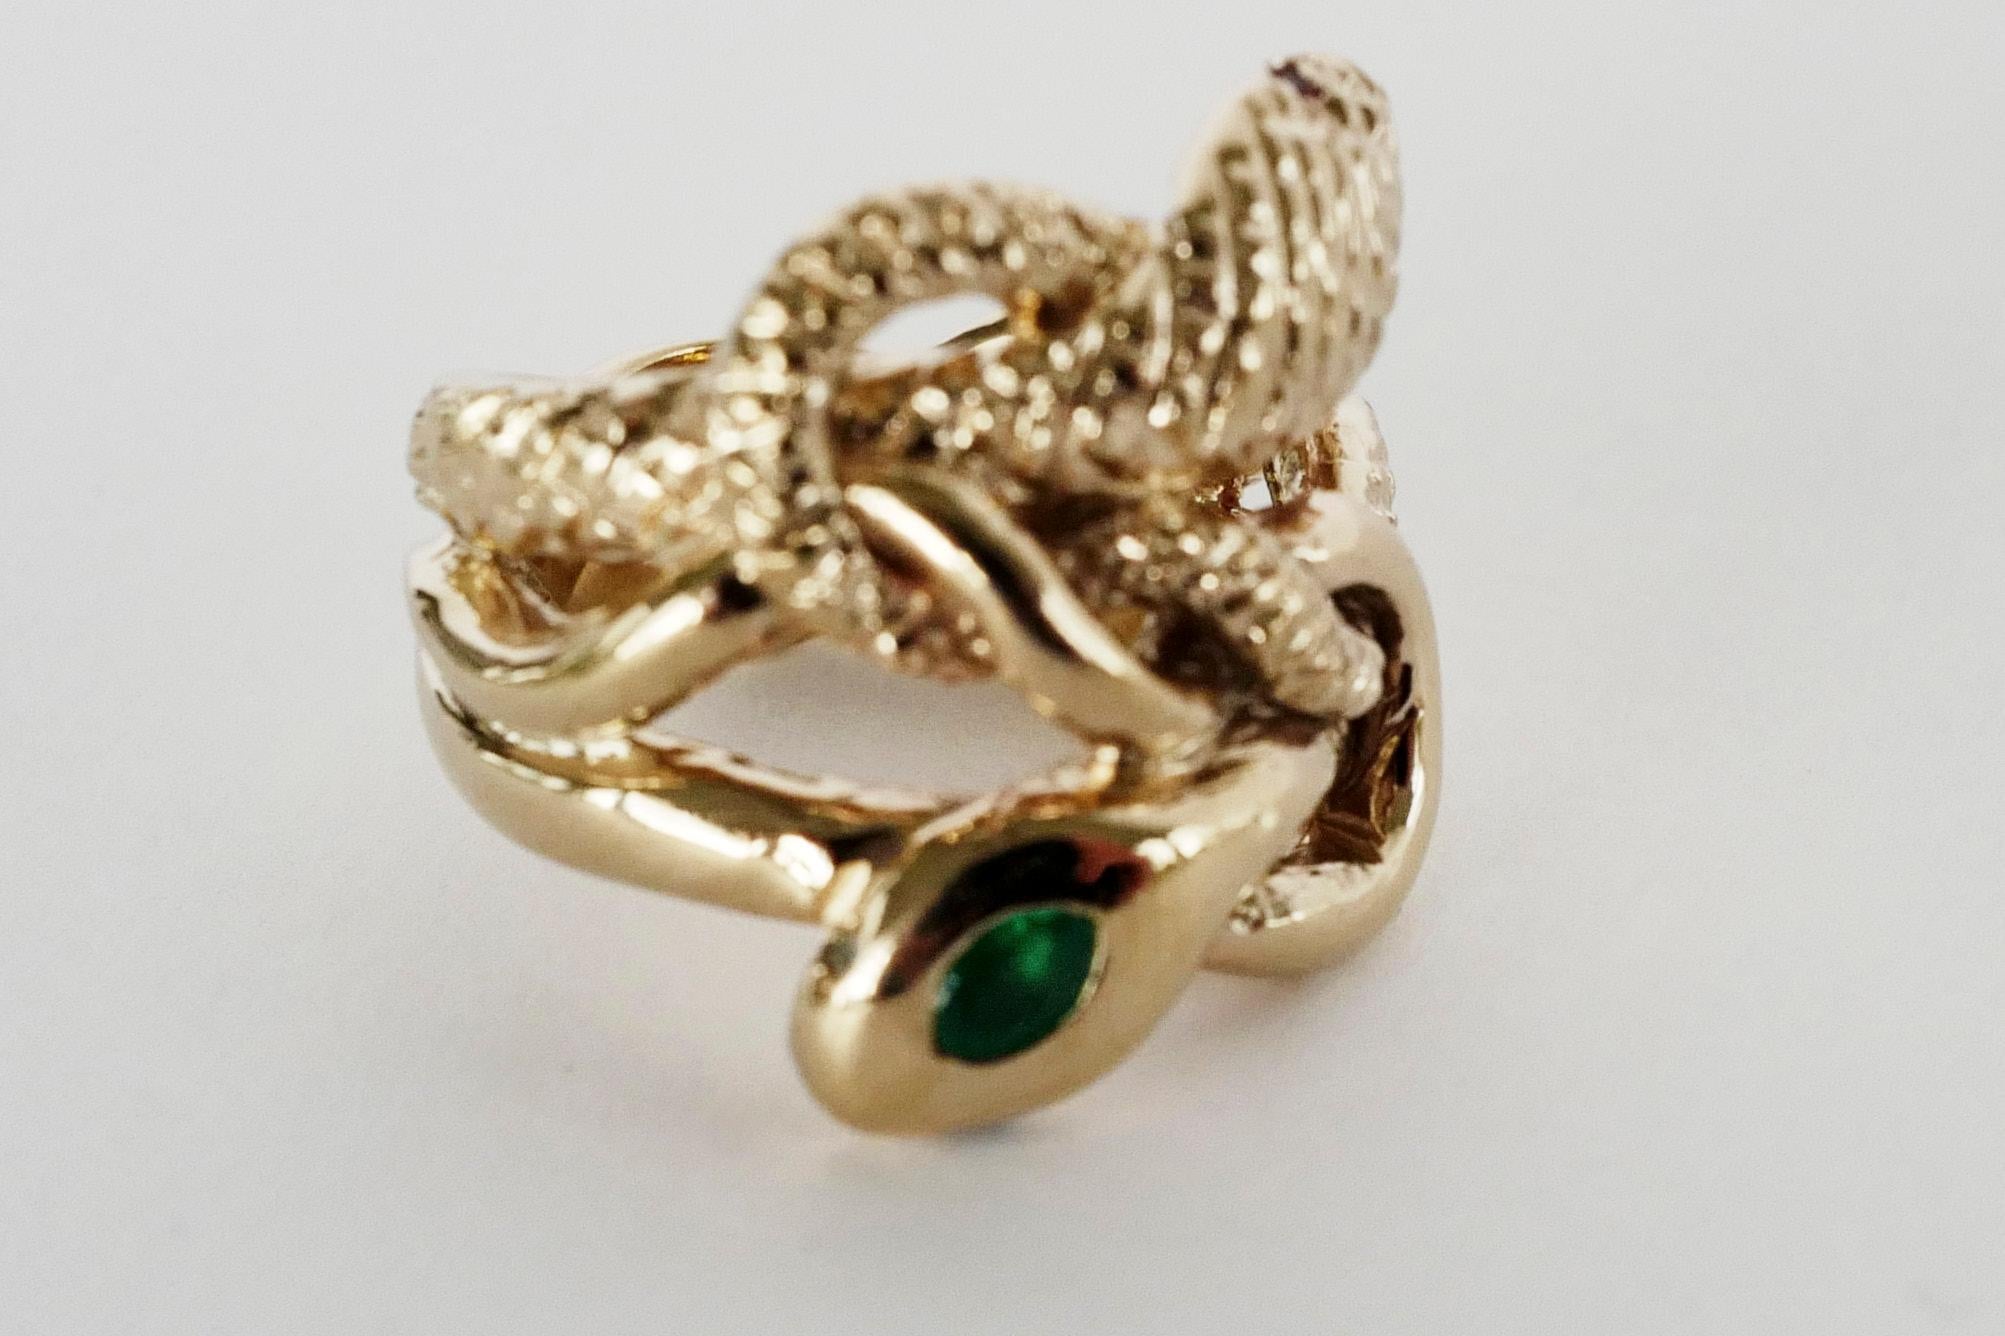 Round Cut Emerald White Diamond Snake Ring Ruby Eyes Bronze Victorian Style J Dauphin For Sale